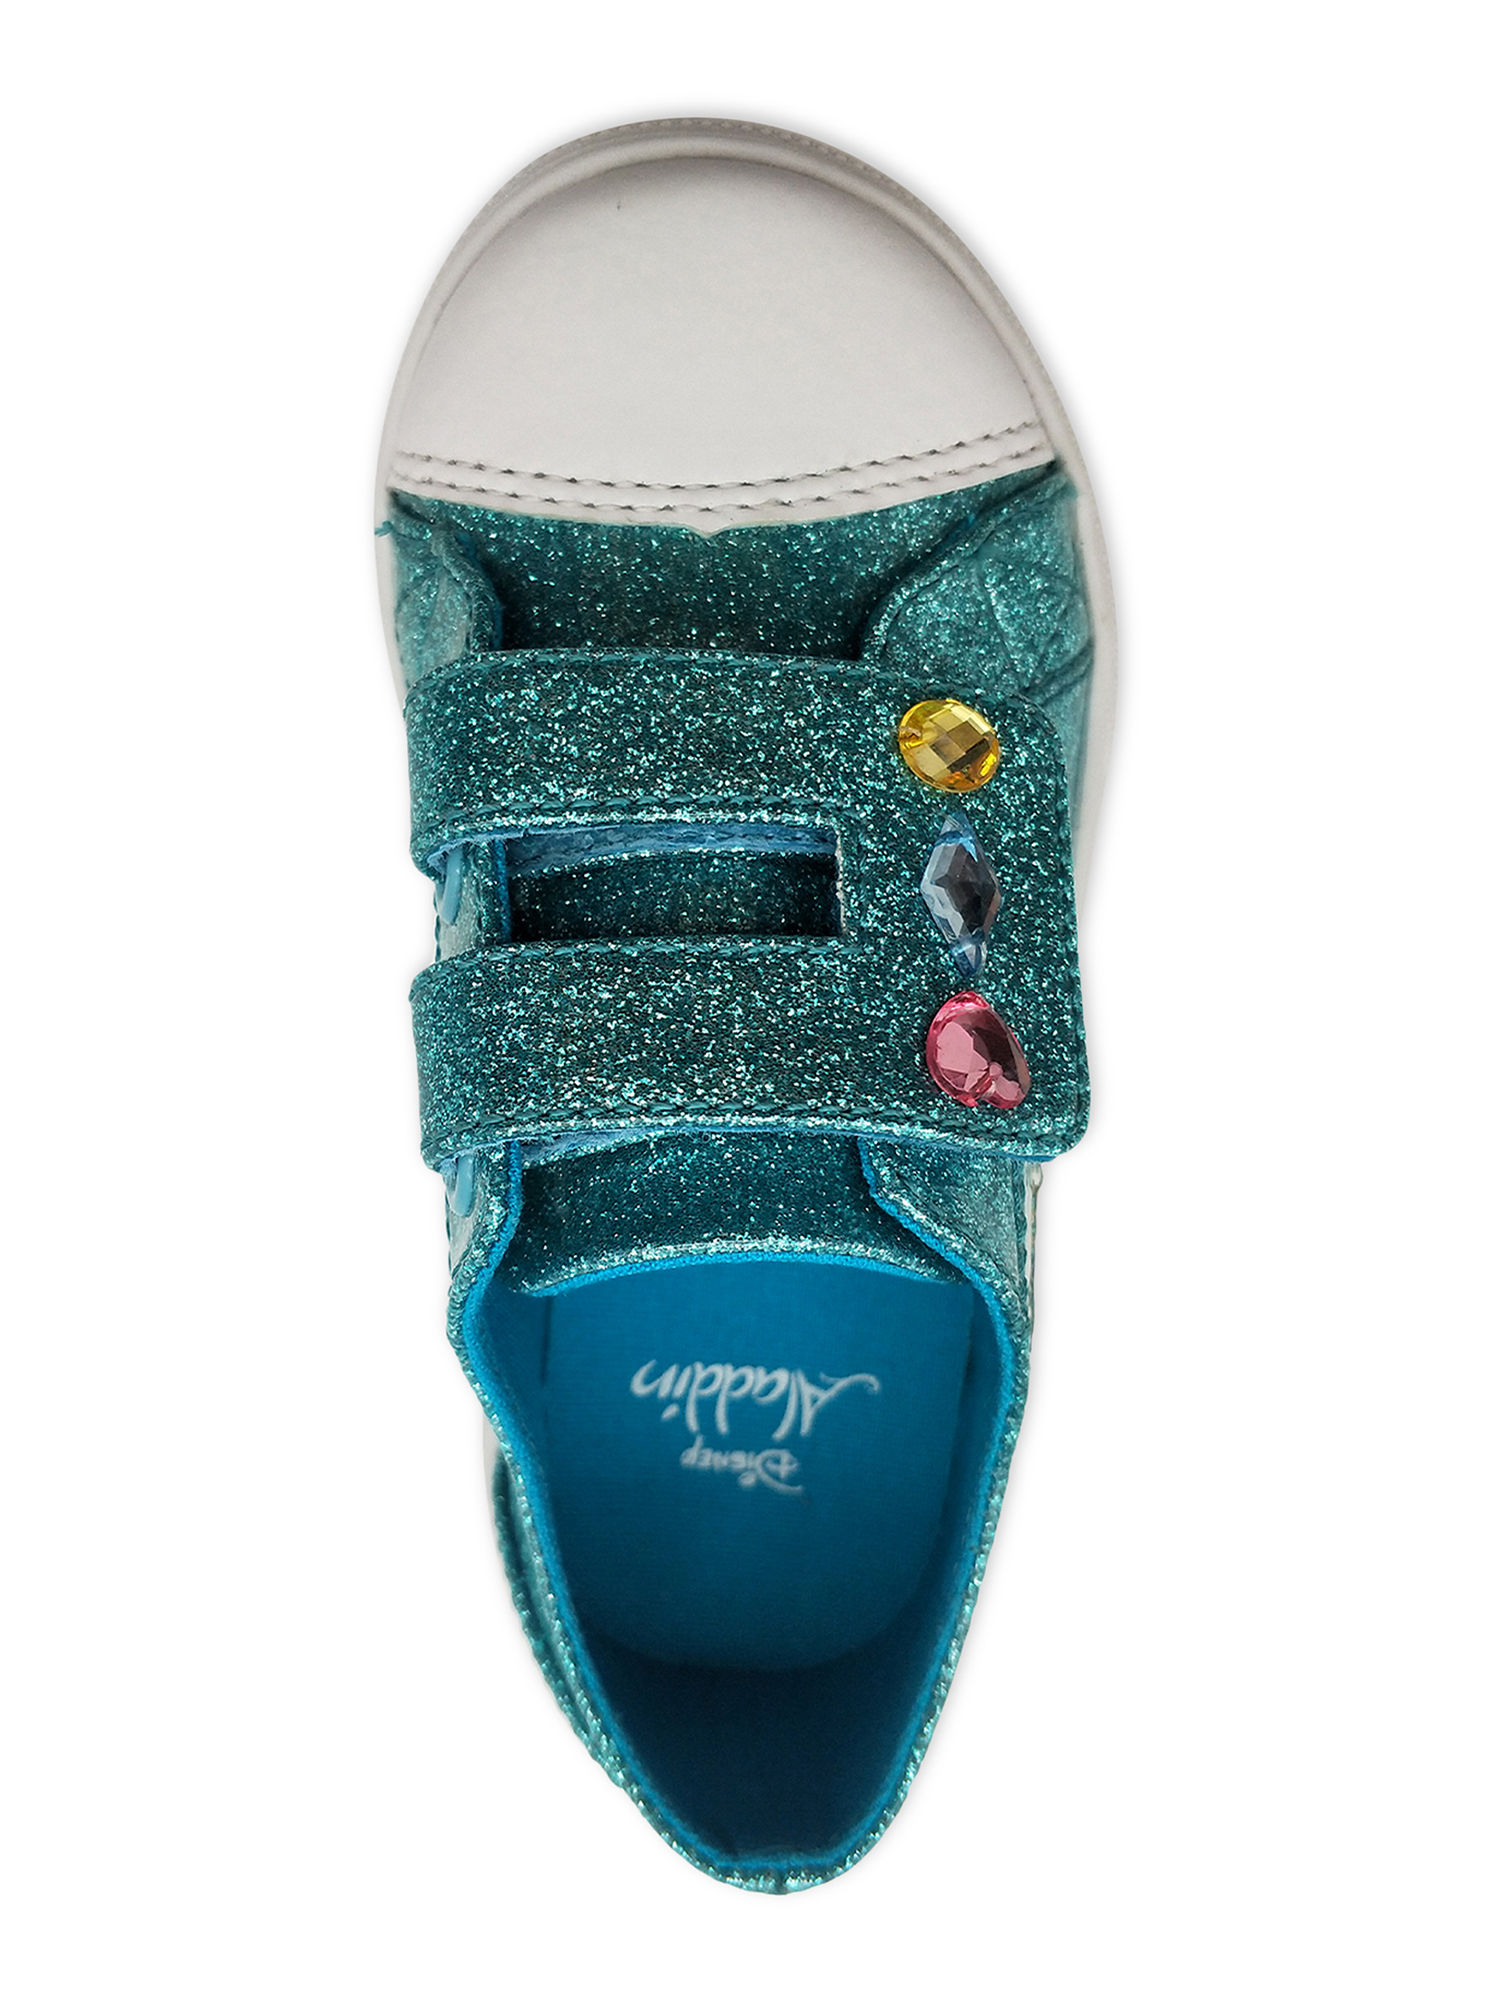 Disney Toddler Girls Aladdin Strap Casual Sneakers, Sizes 7-12 - image 3 of 6